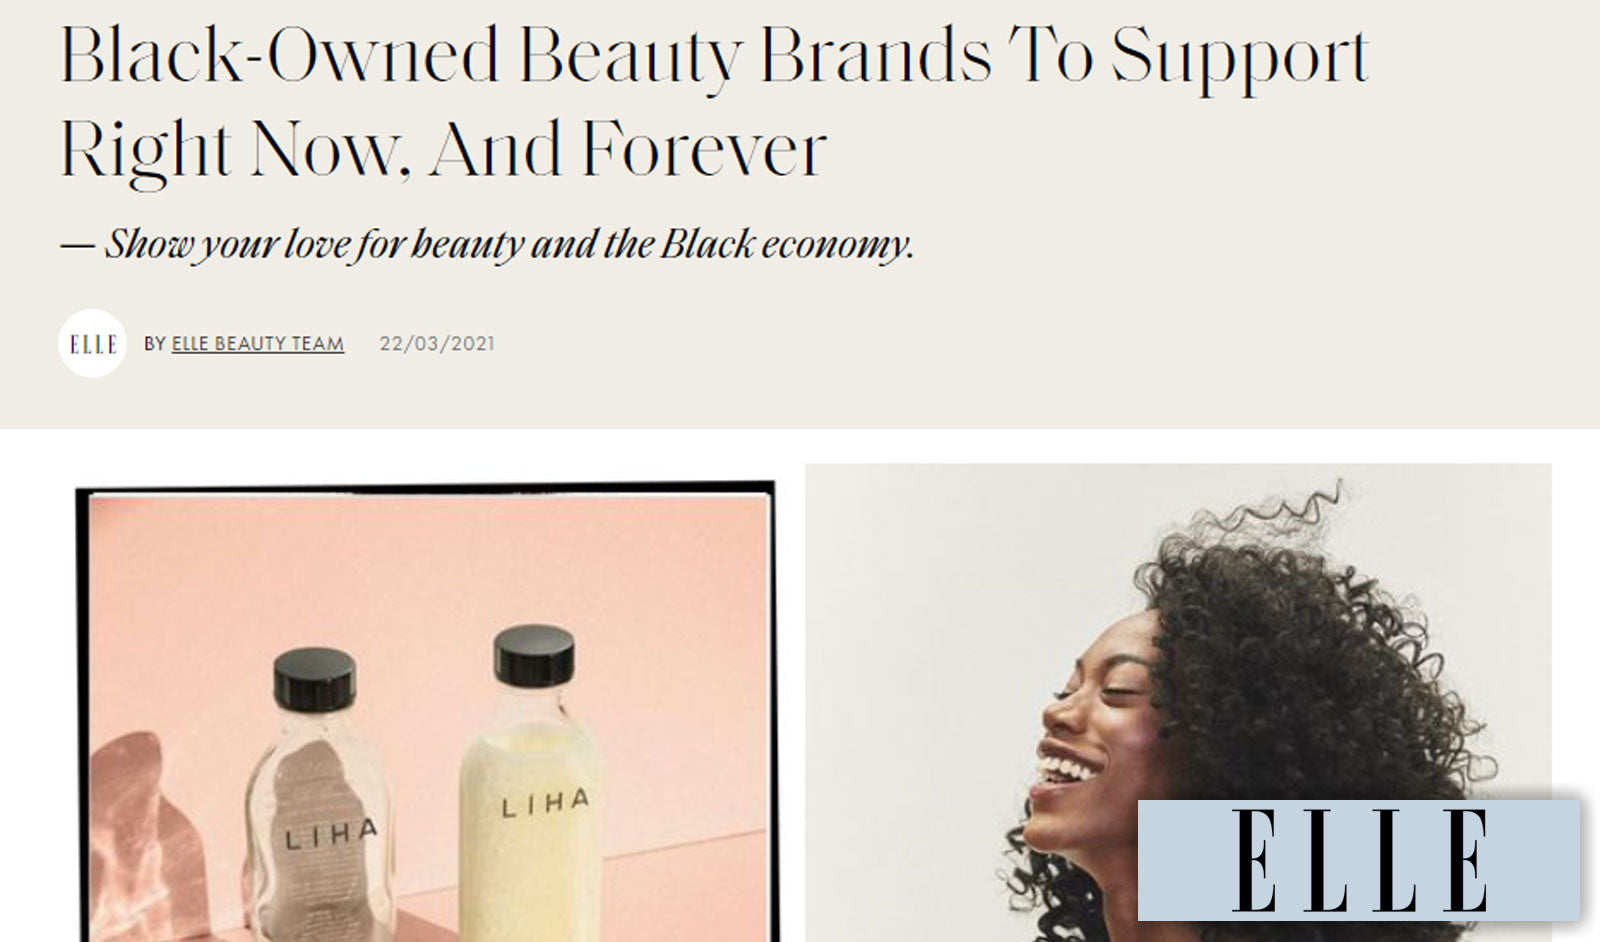 Black-Owned Beauty Brands To Support Right Now, And Forever